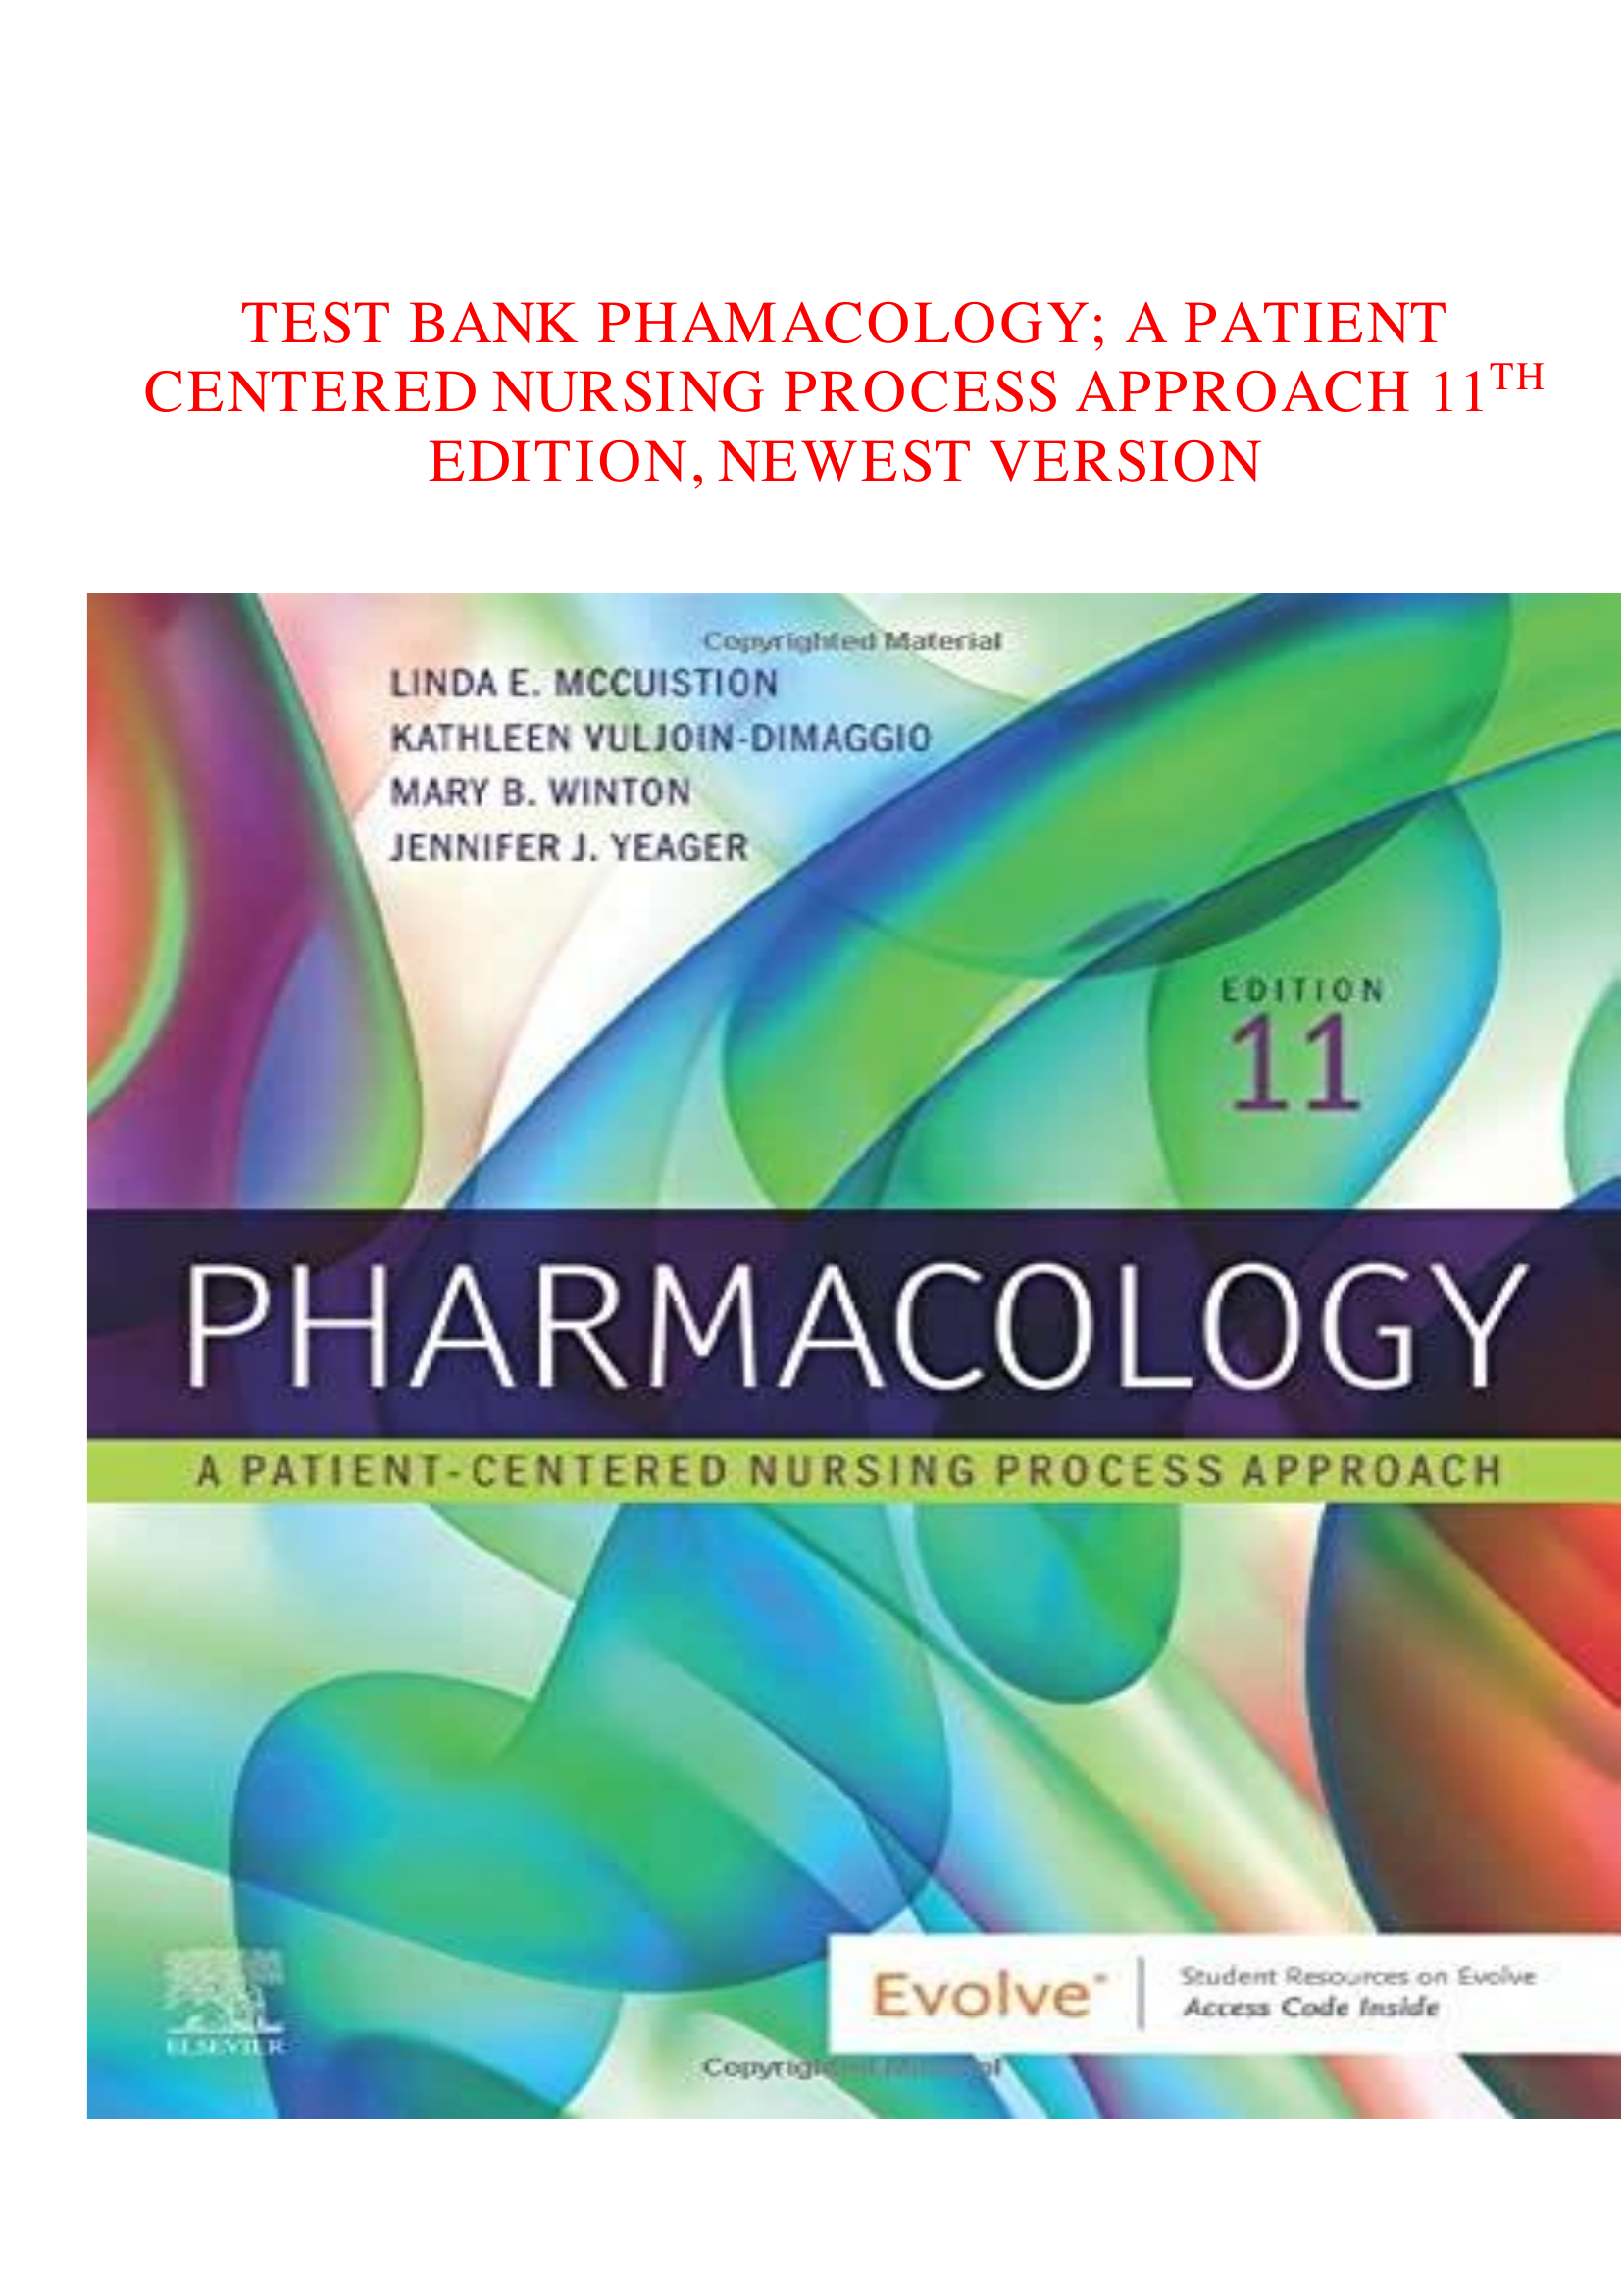 Pharmacology;A Patient Centered Nursing Process Approach